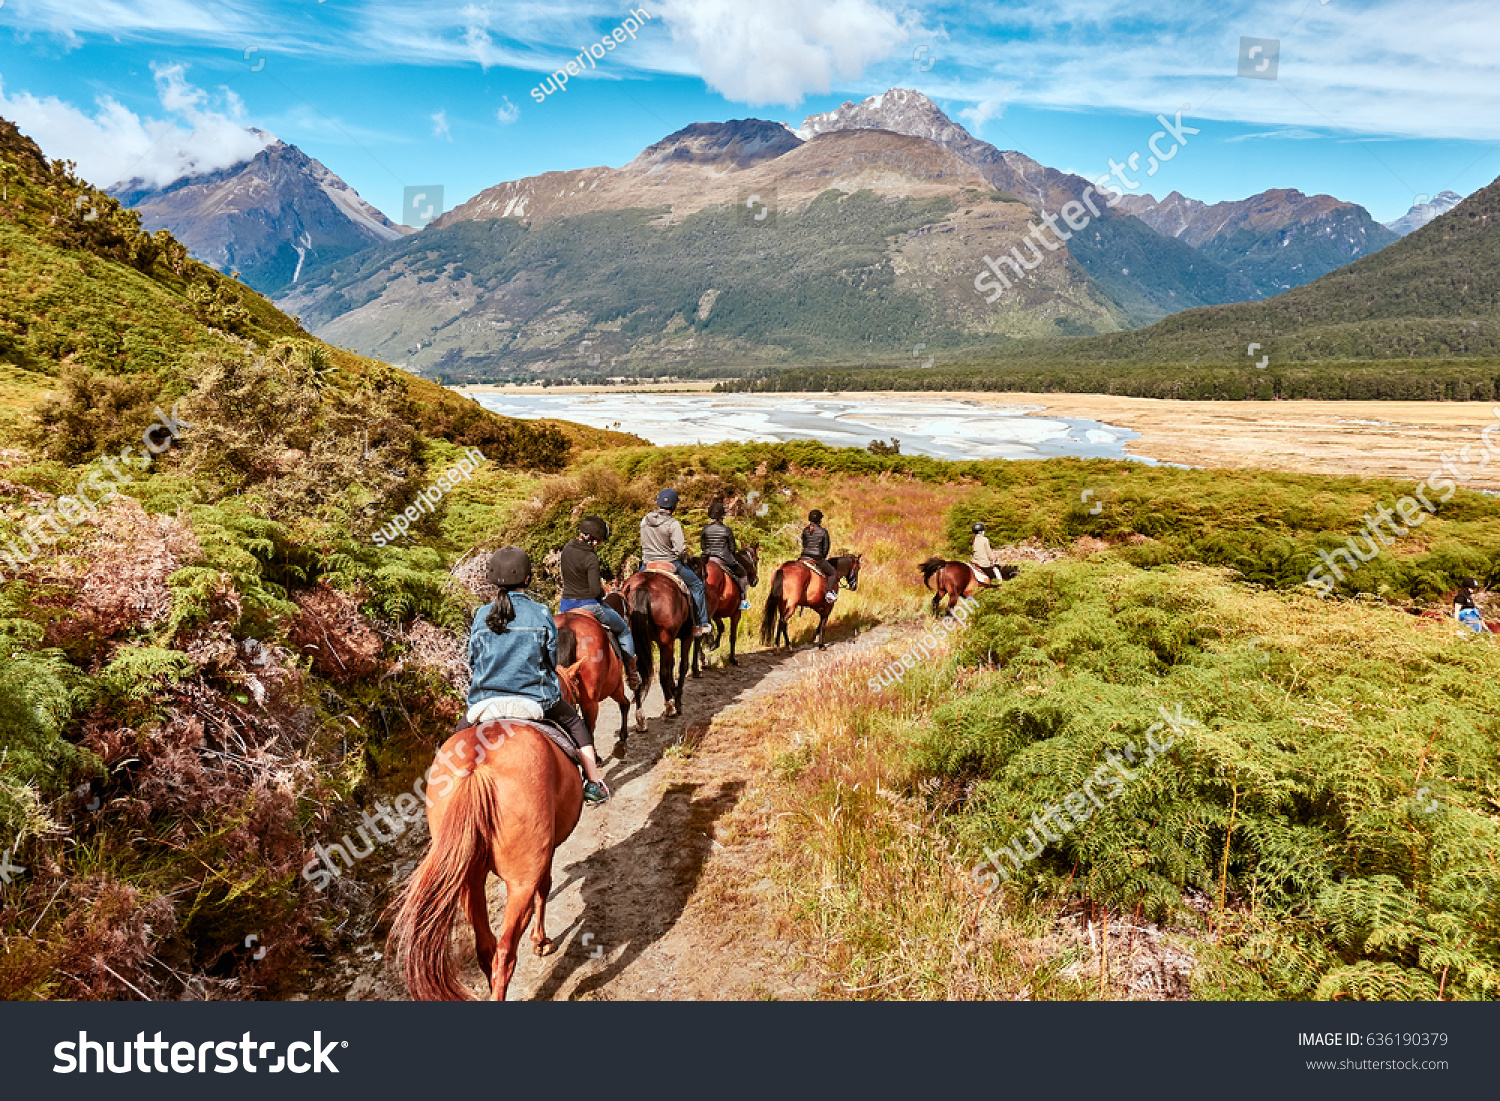 Glenorchy, New Zealand - Feb 07, 2017: Tourist embark on a Horse Riding on a farm in Glenorchy, NZ. it was used as one of the settings in Lord of the Rings films.                                #636190379